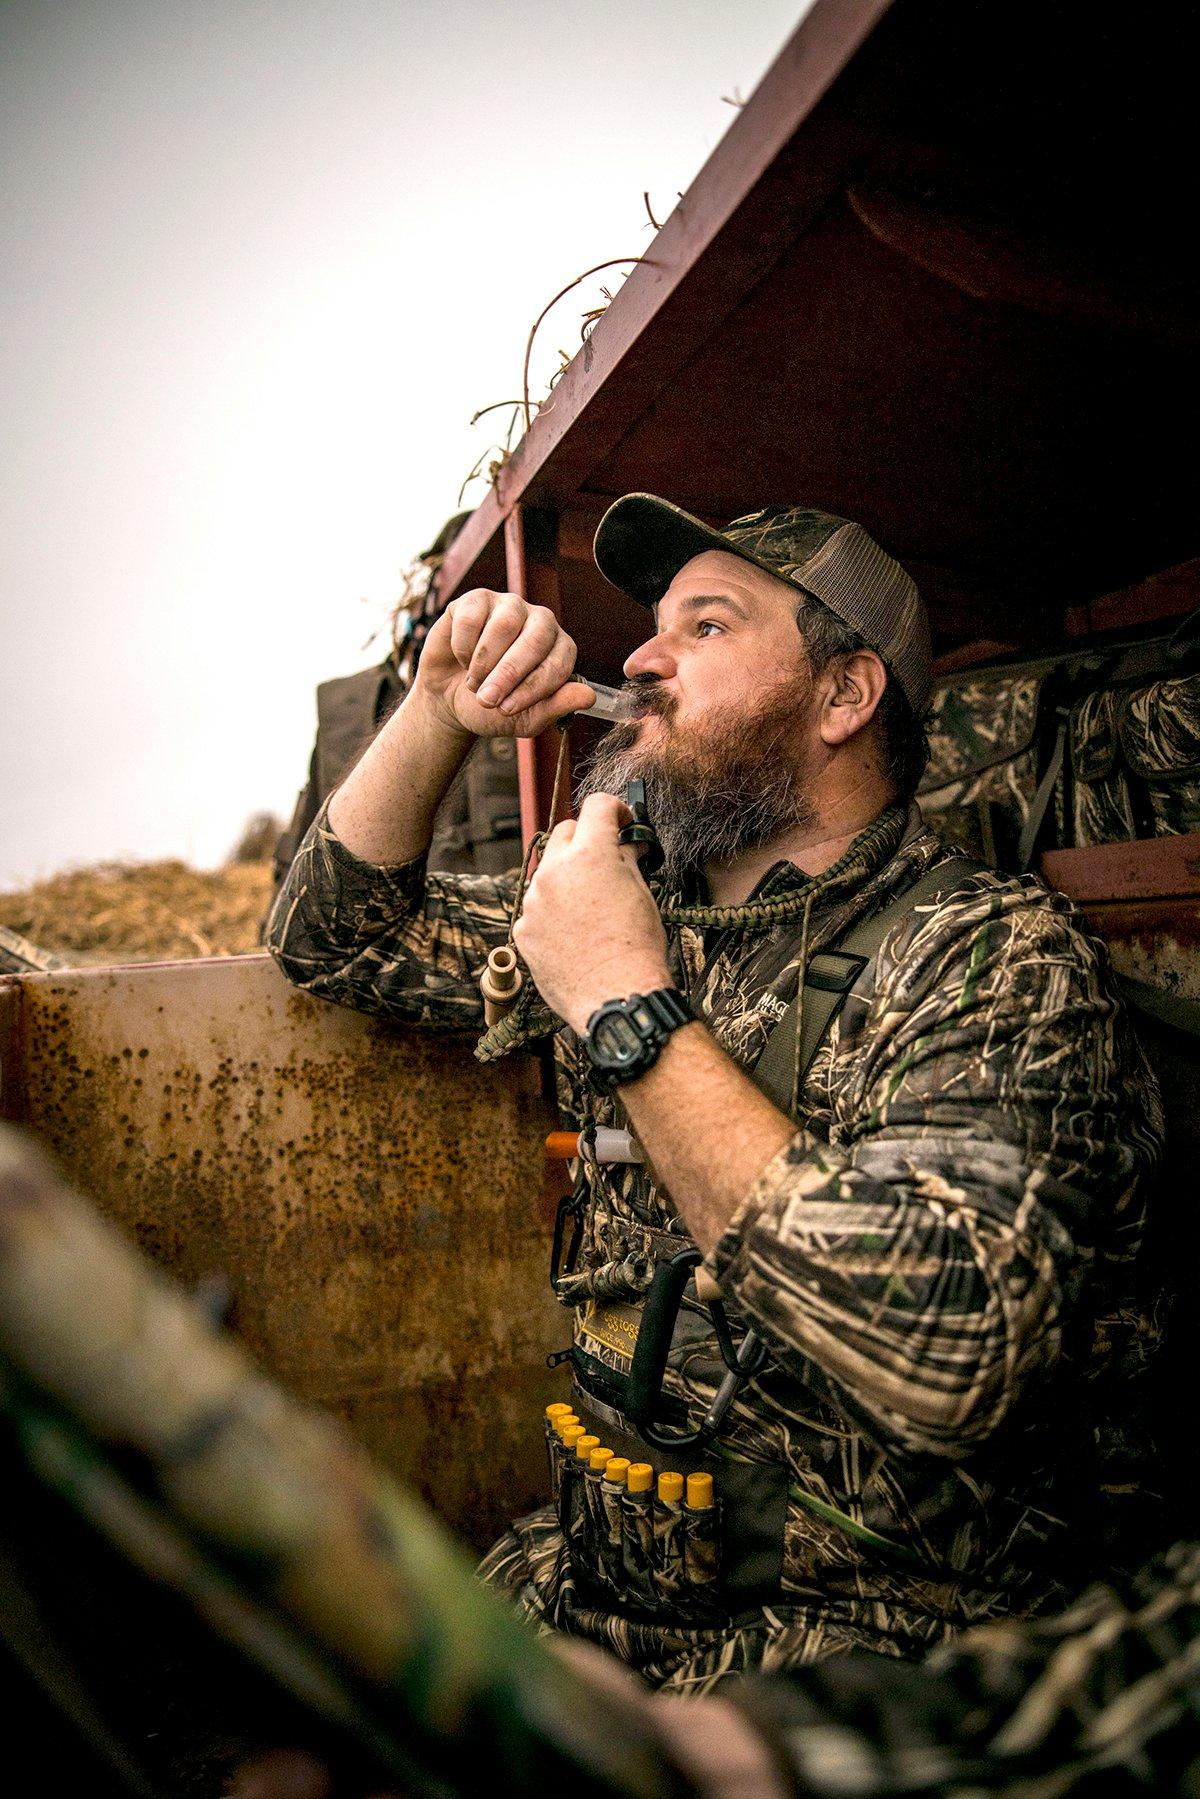 Many of Realtree's top duck hunting pros attended the MAX-7 camp, including Justin Martin of Duck Commander. Realtree photo